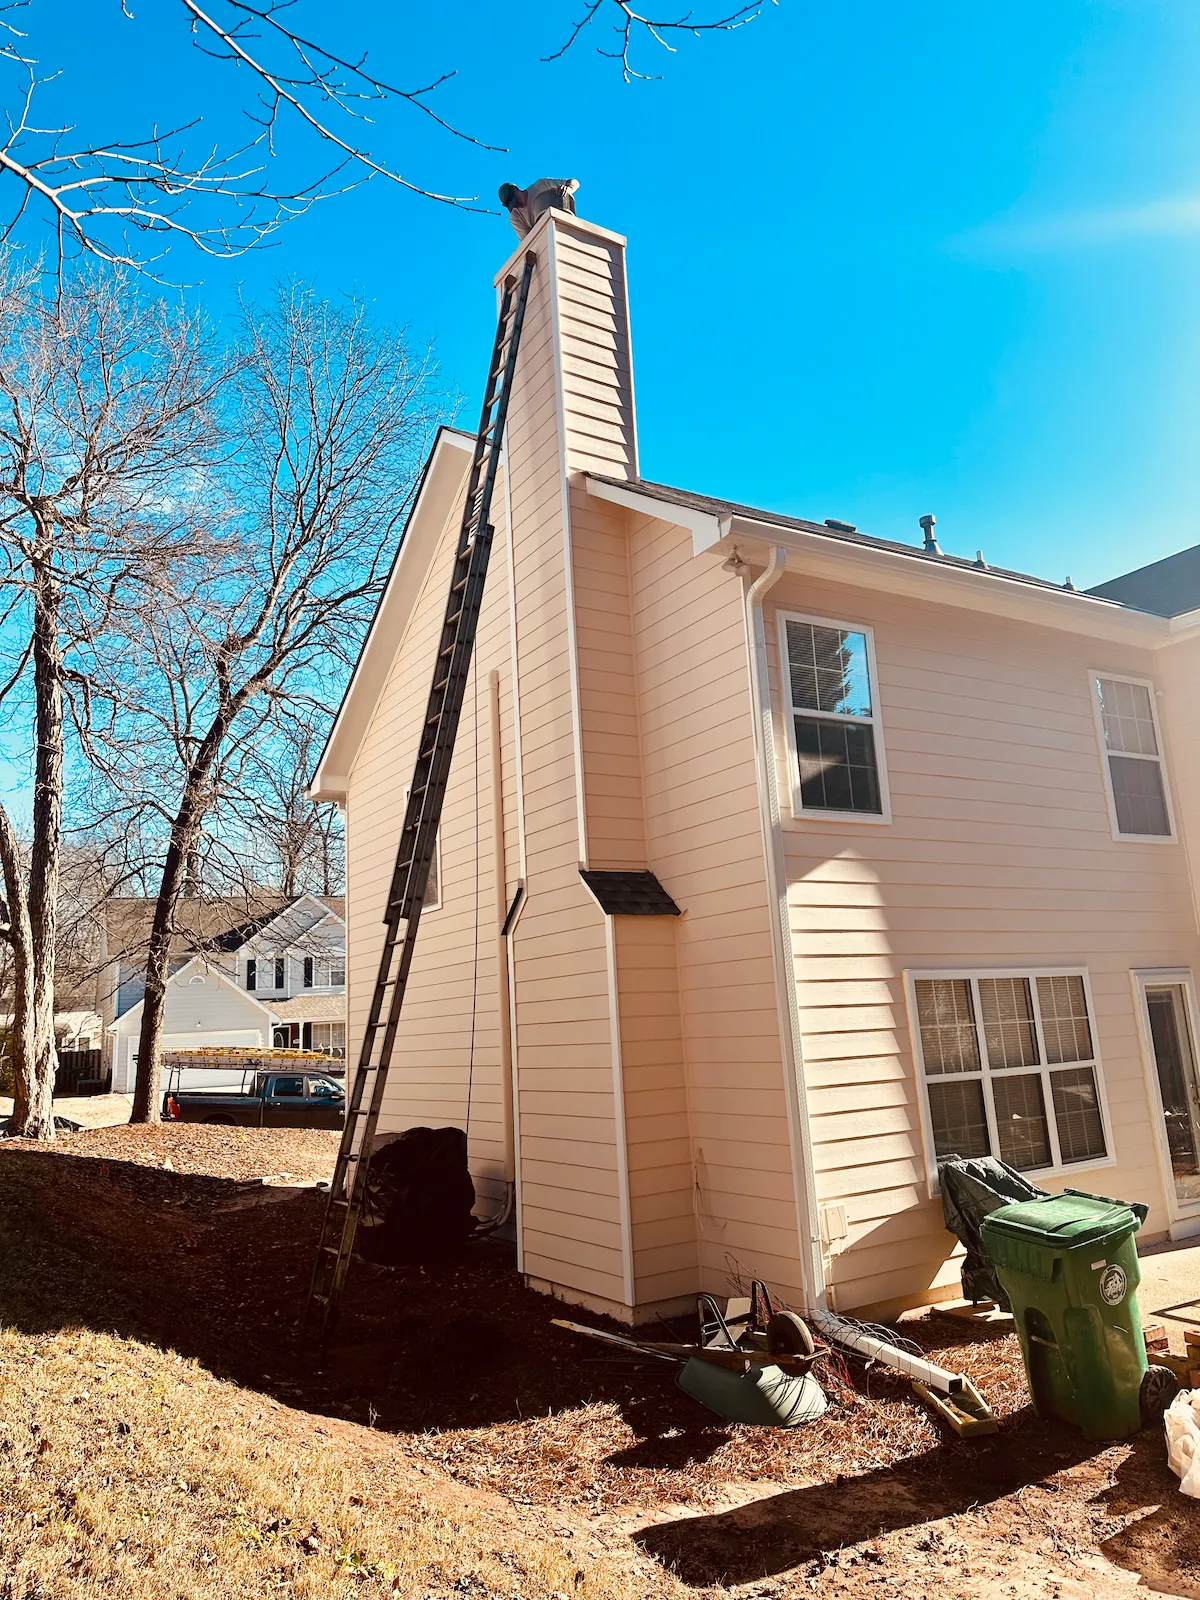 chase cover | custom chase covers | chimney pan installation near me